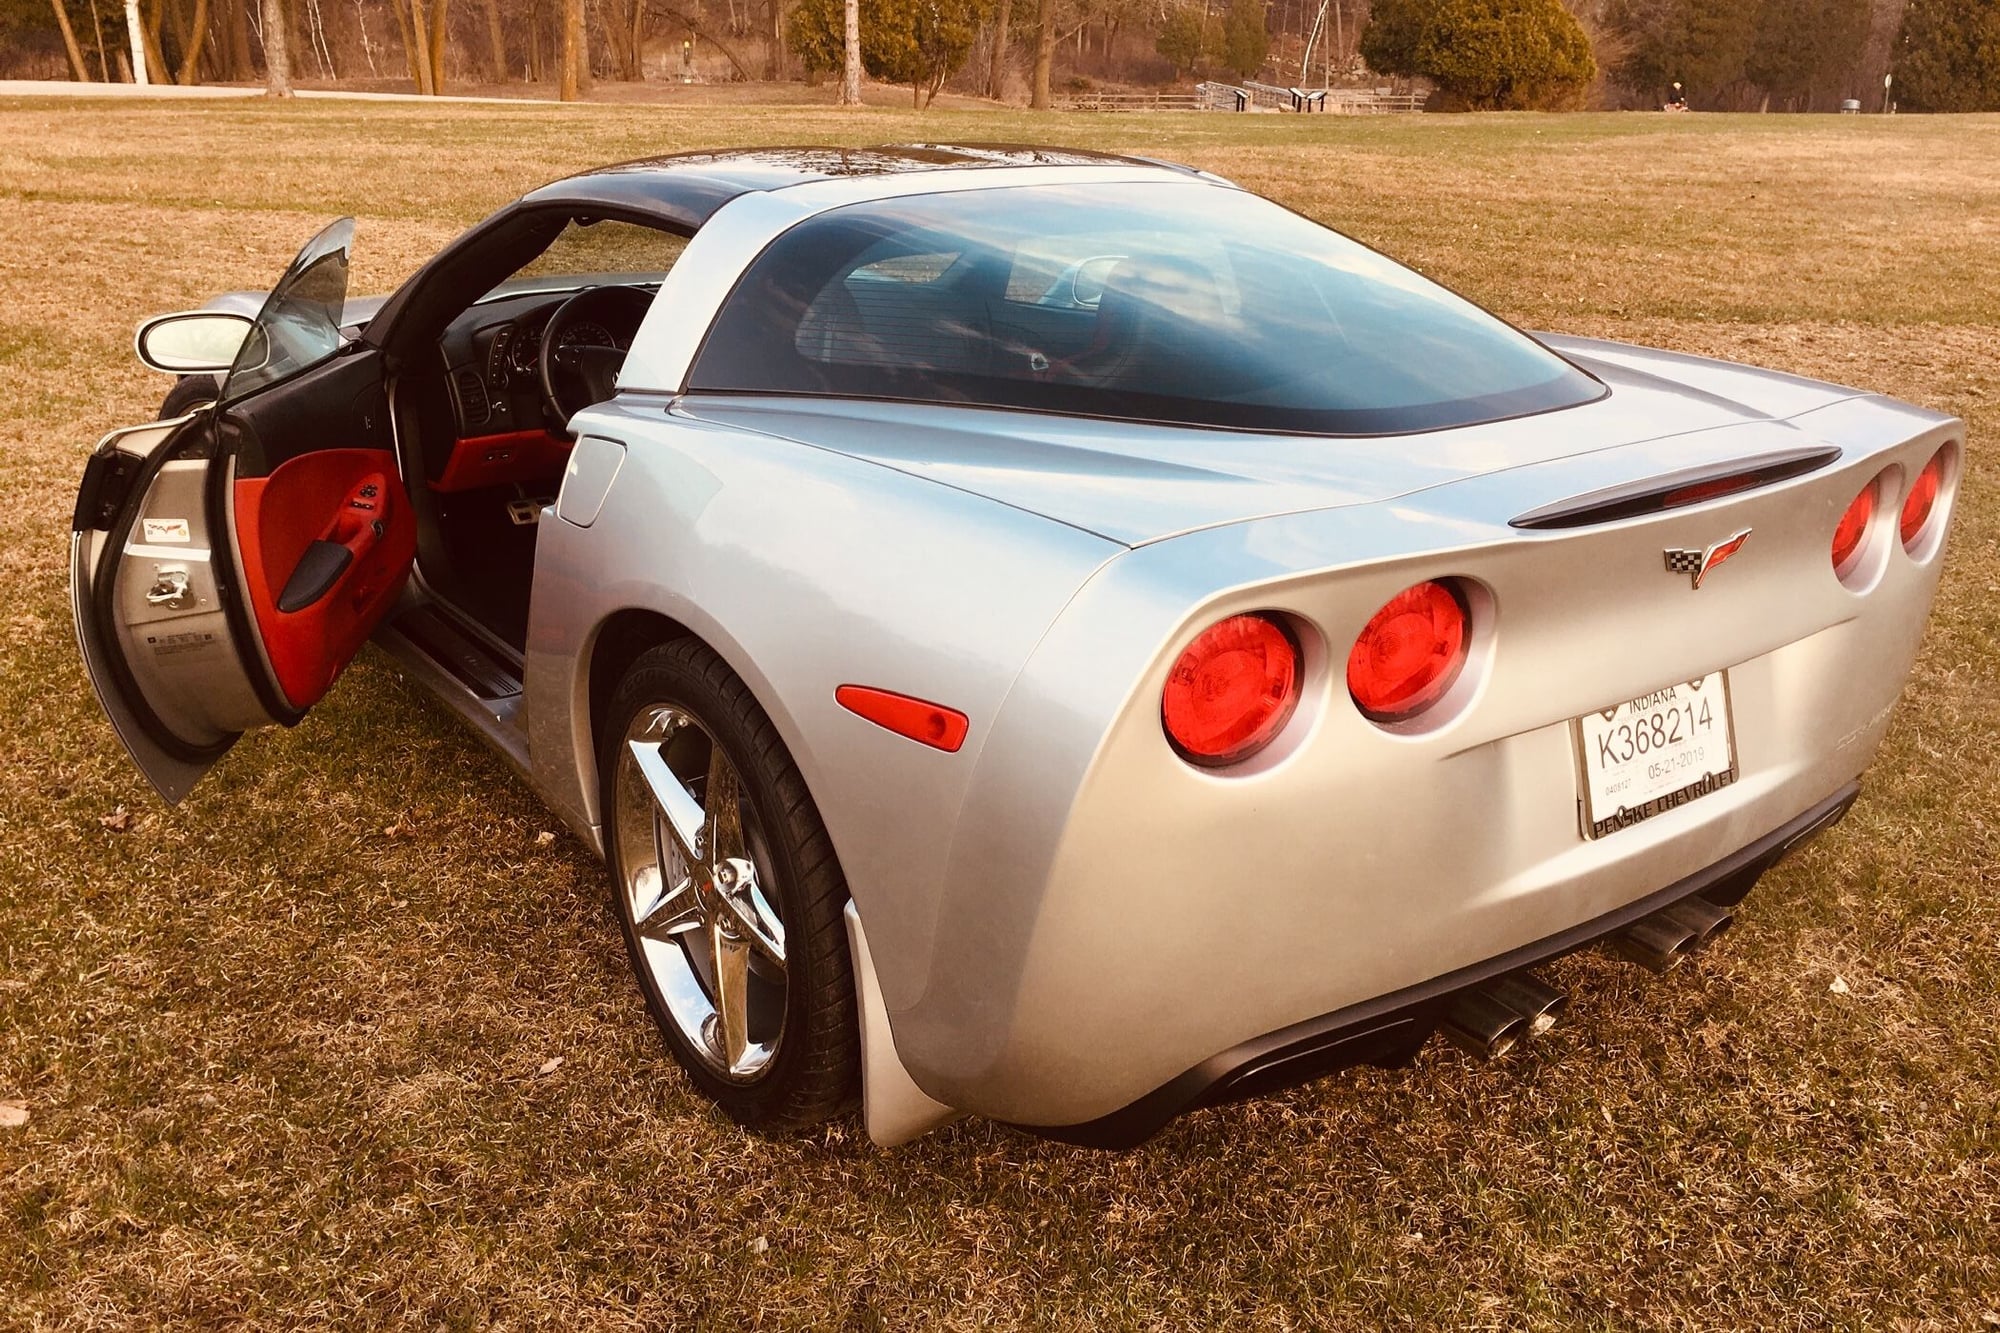 New C6 owner and wanted to share pics - CorvetteForum - Chevrolet